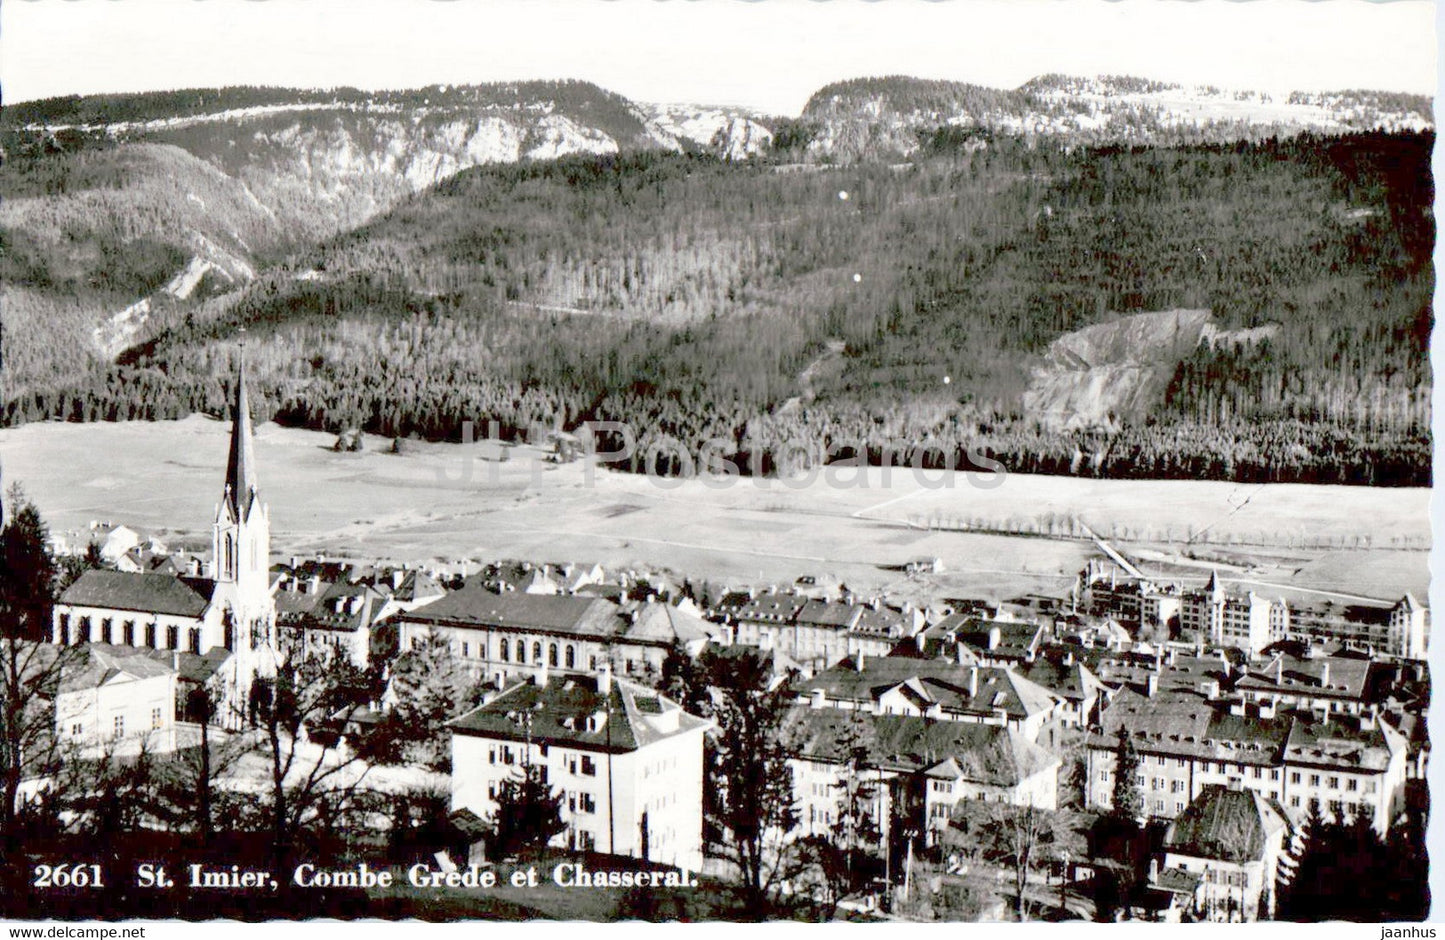 St Imier - Combe Grede et Chasseral - 2661 - old postcard - 1955 - Switzerland - used - JH Postcards